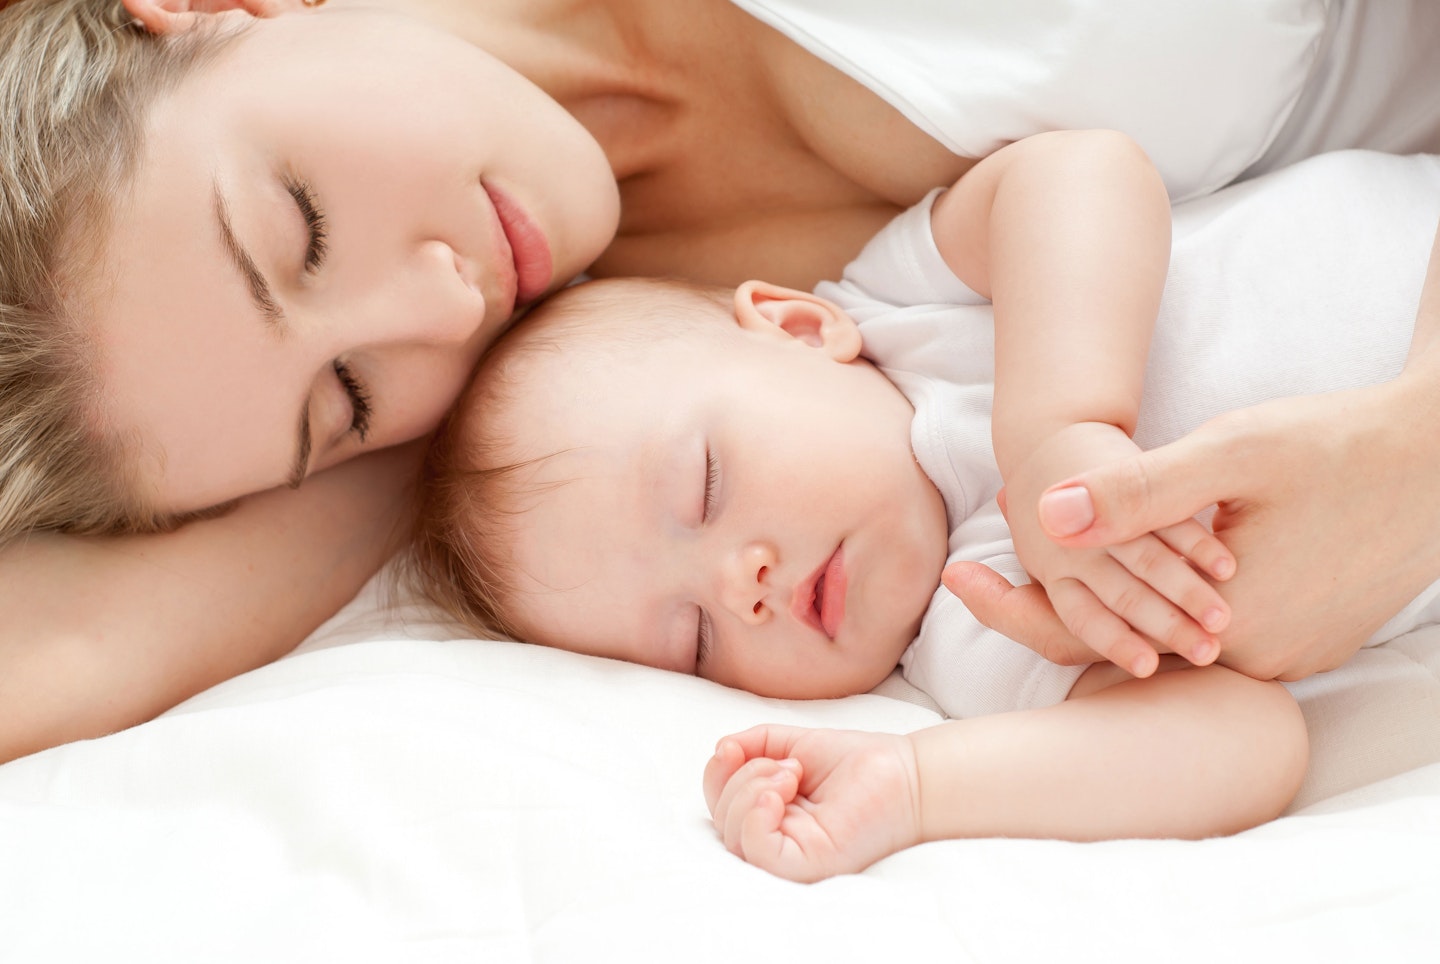 Sleeping with a newborn baby: survival tips